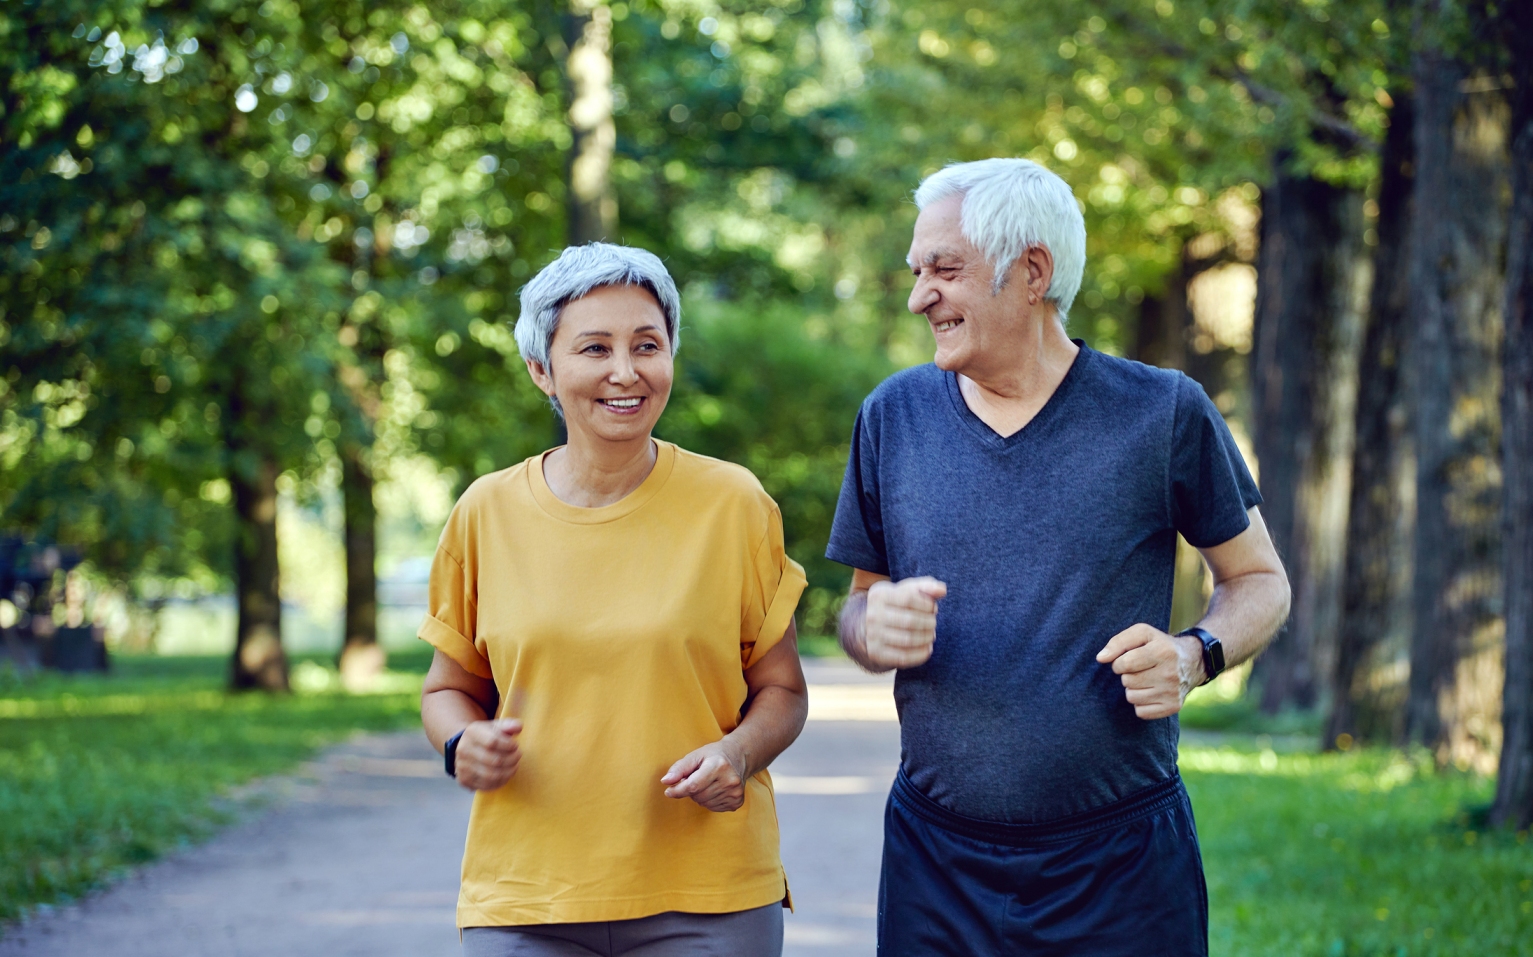 Elderly couple jogging in park to prevent eye problems like macular degeneration, showcasing active lifestyle for eye health after 50.